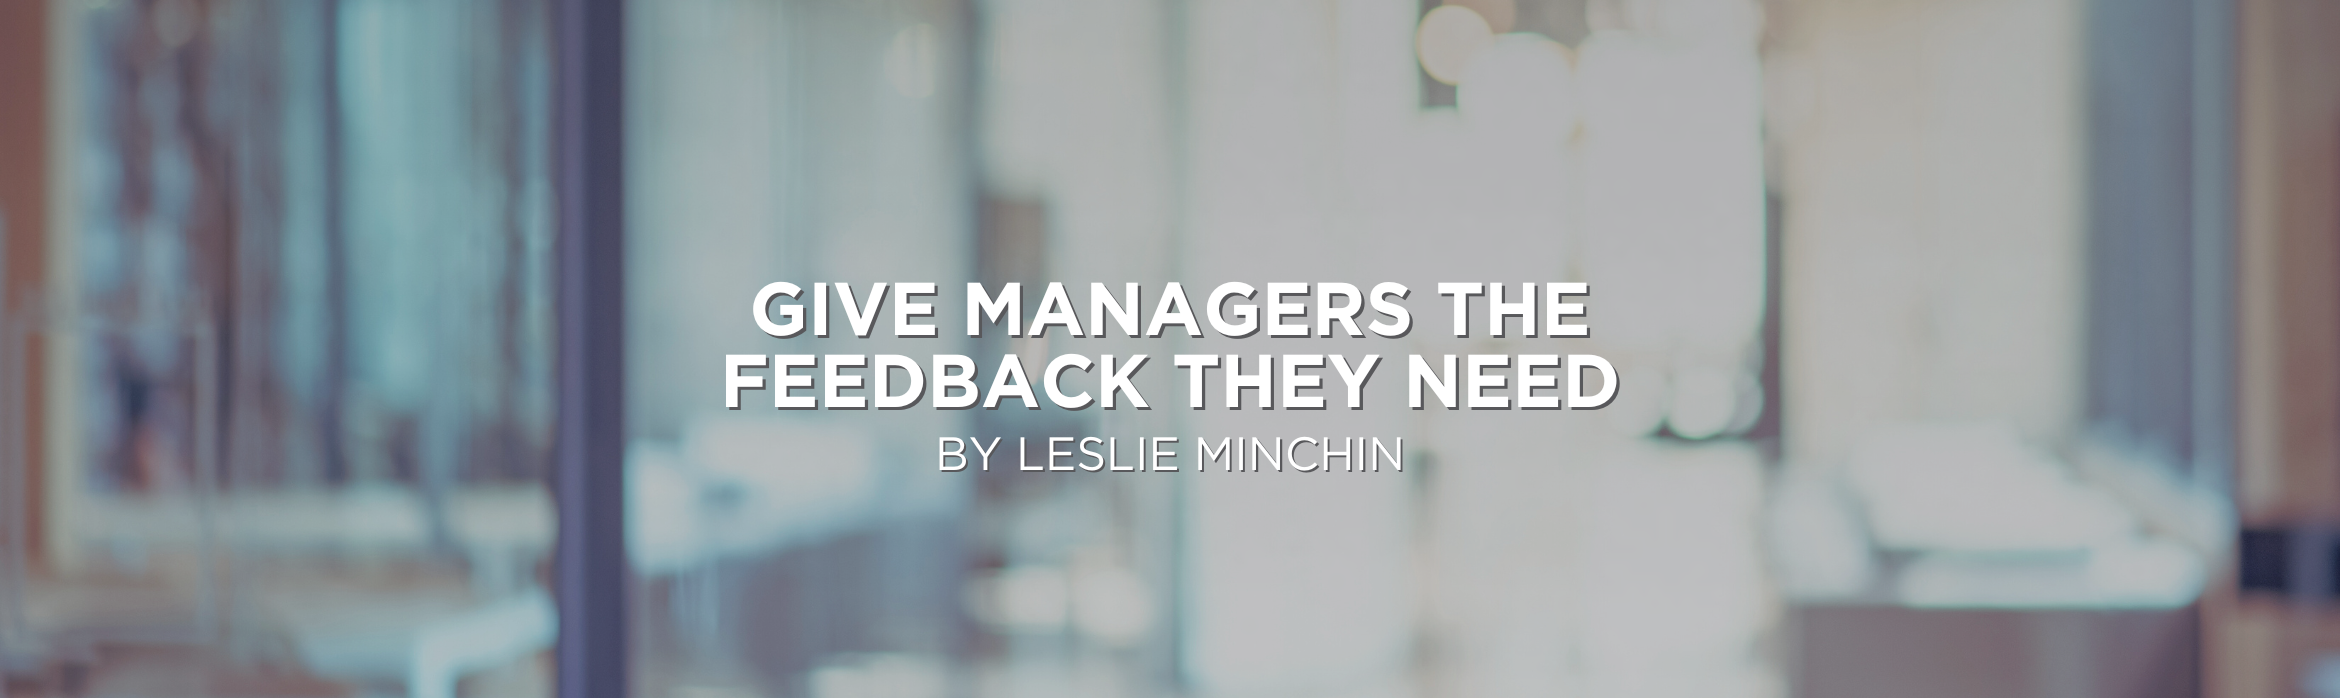 Give Managers the Feedback They Need